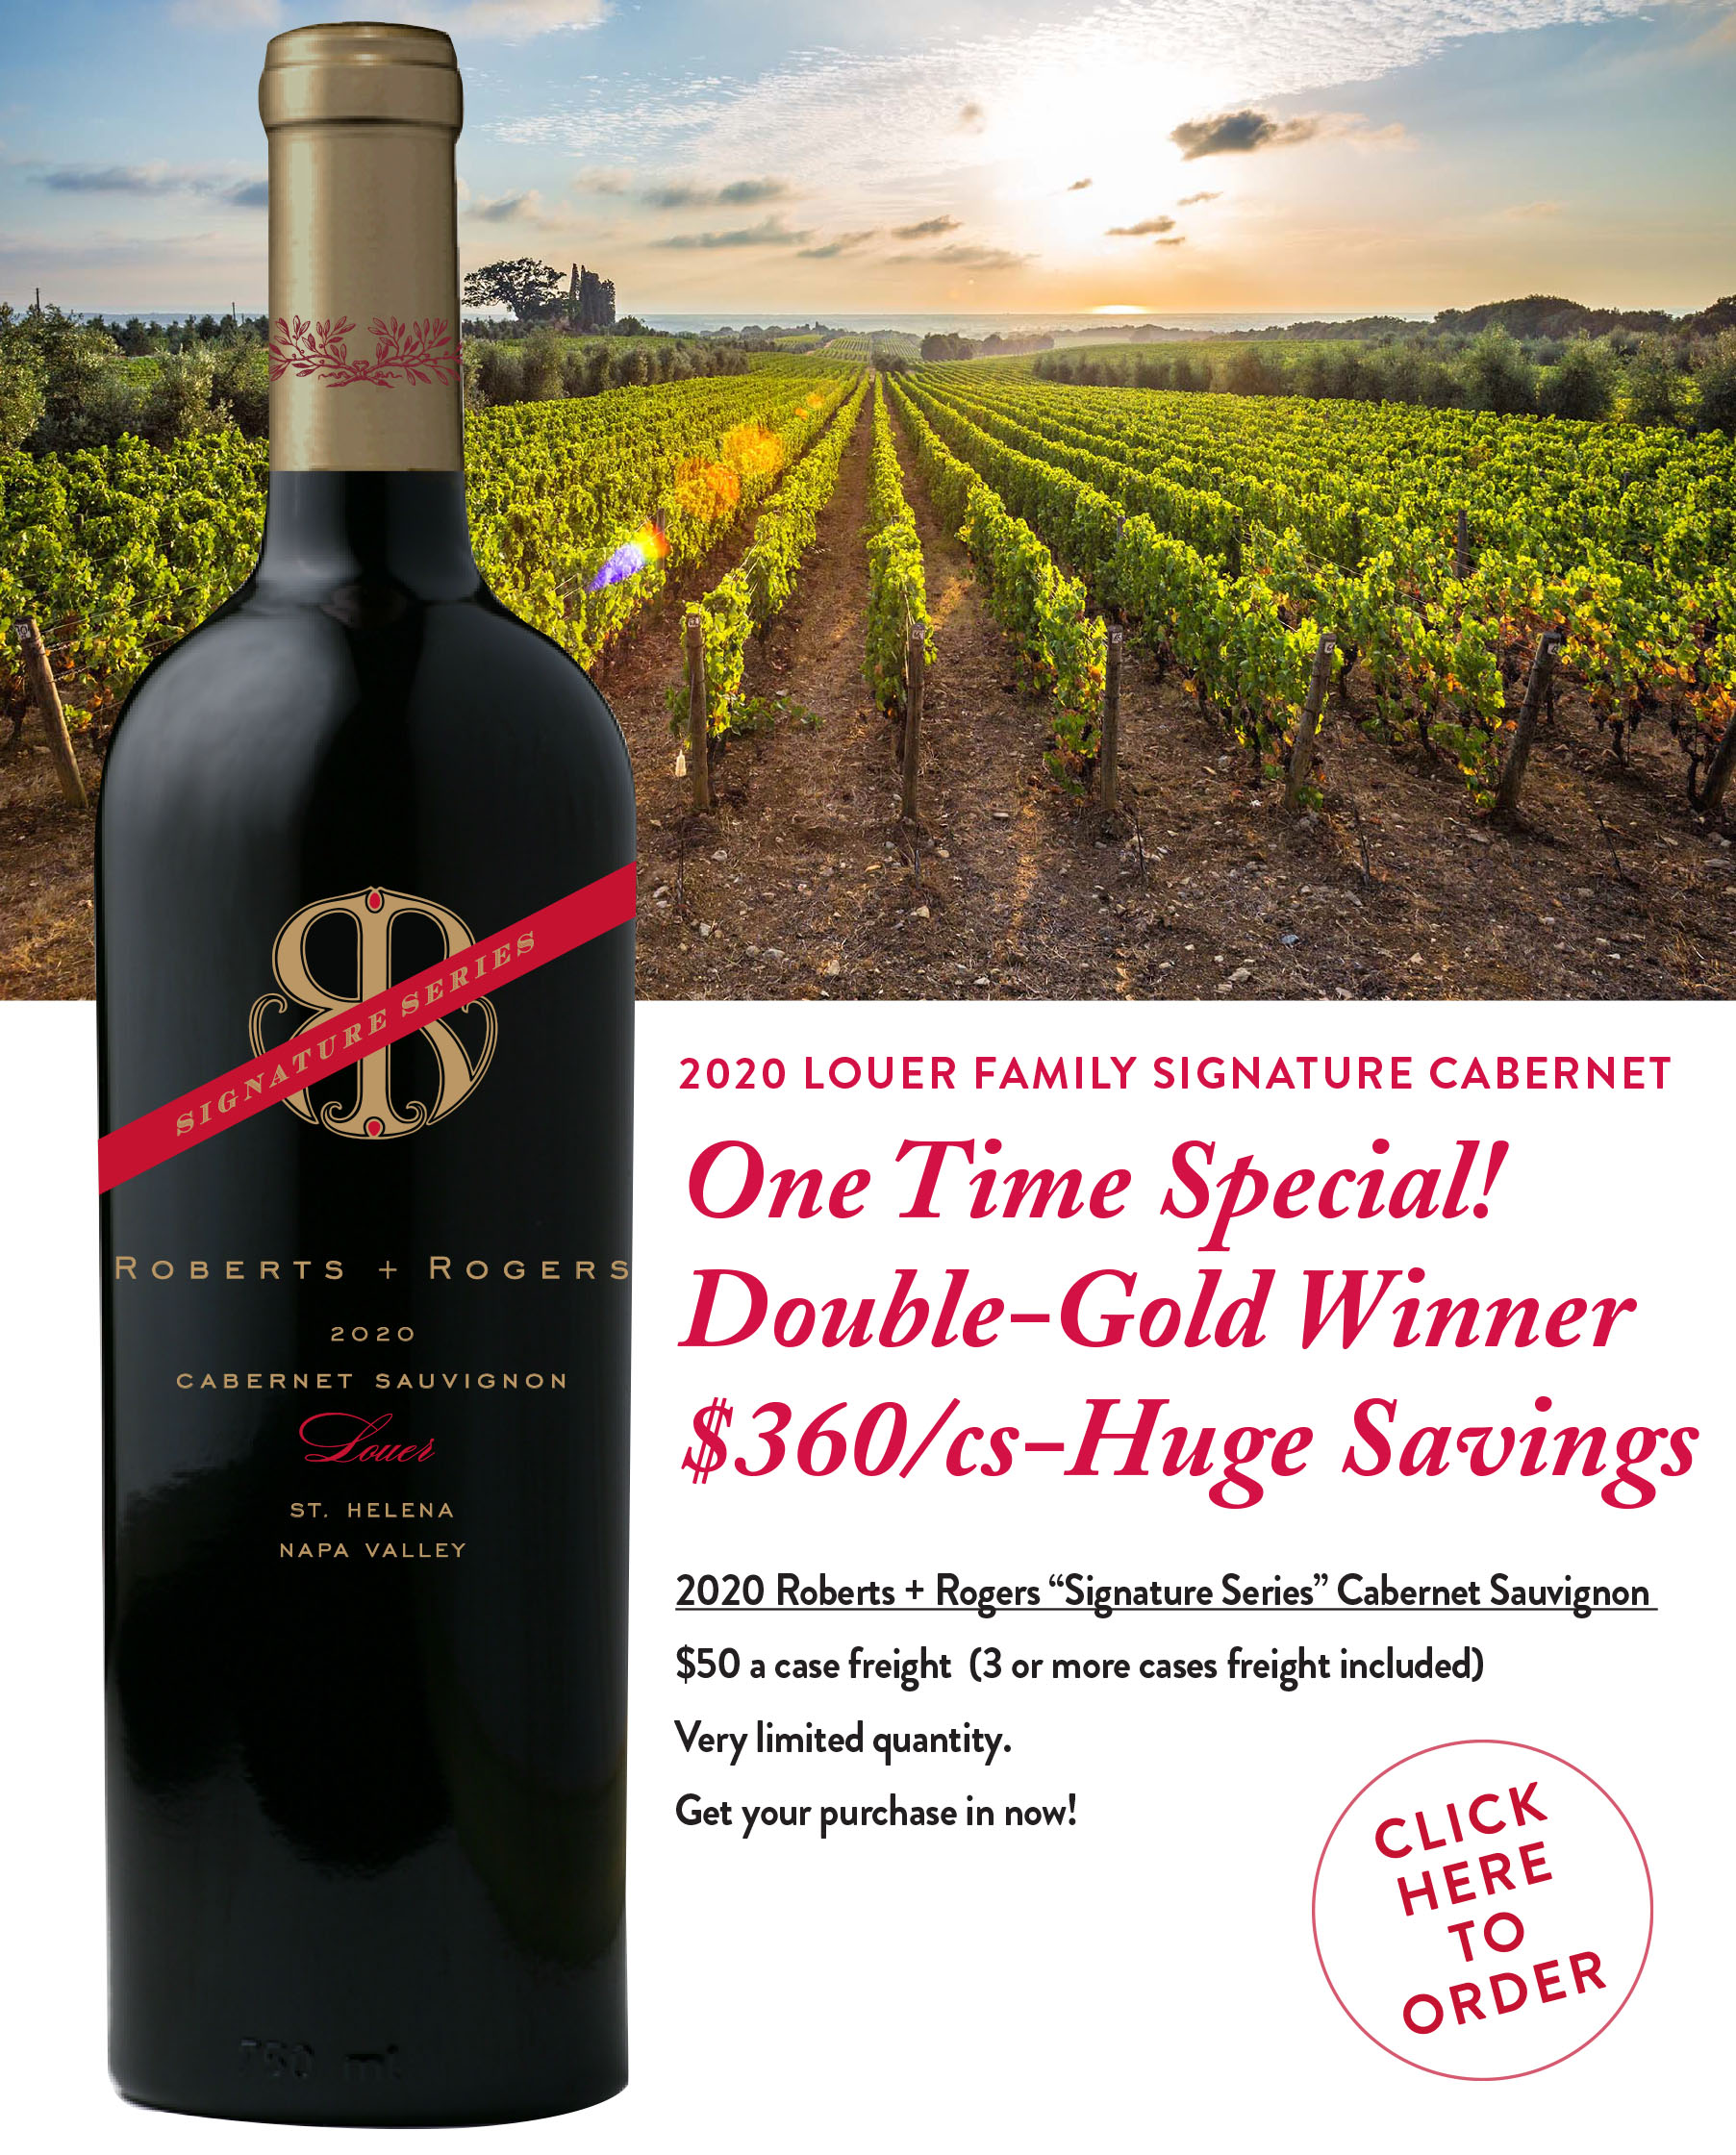 Product Image for 2020 Signature Series Cabernet Special!